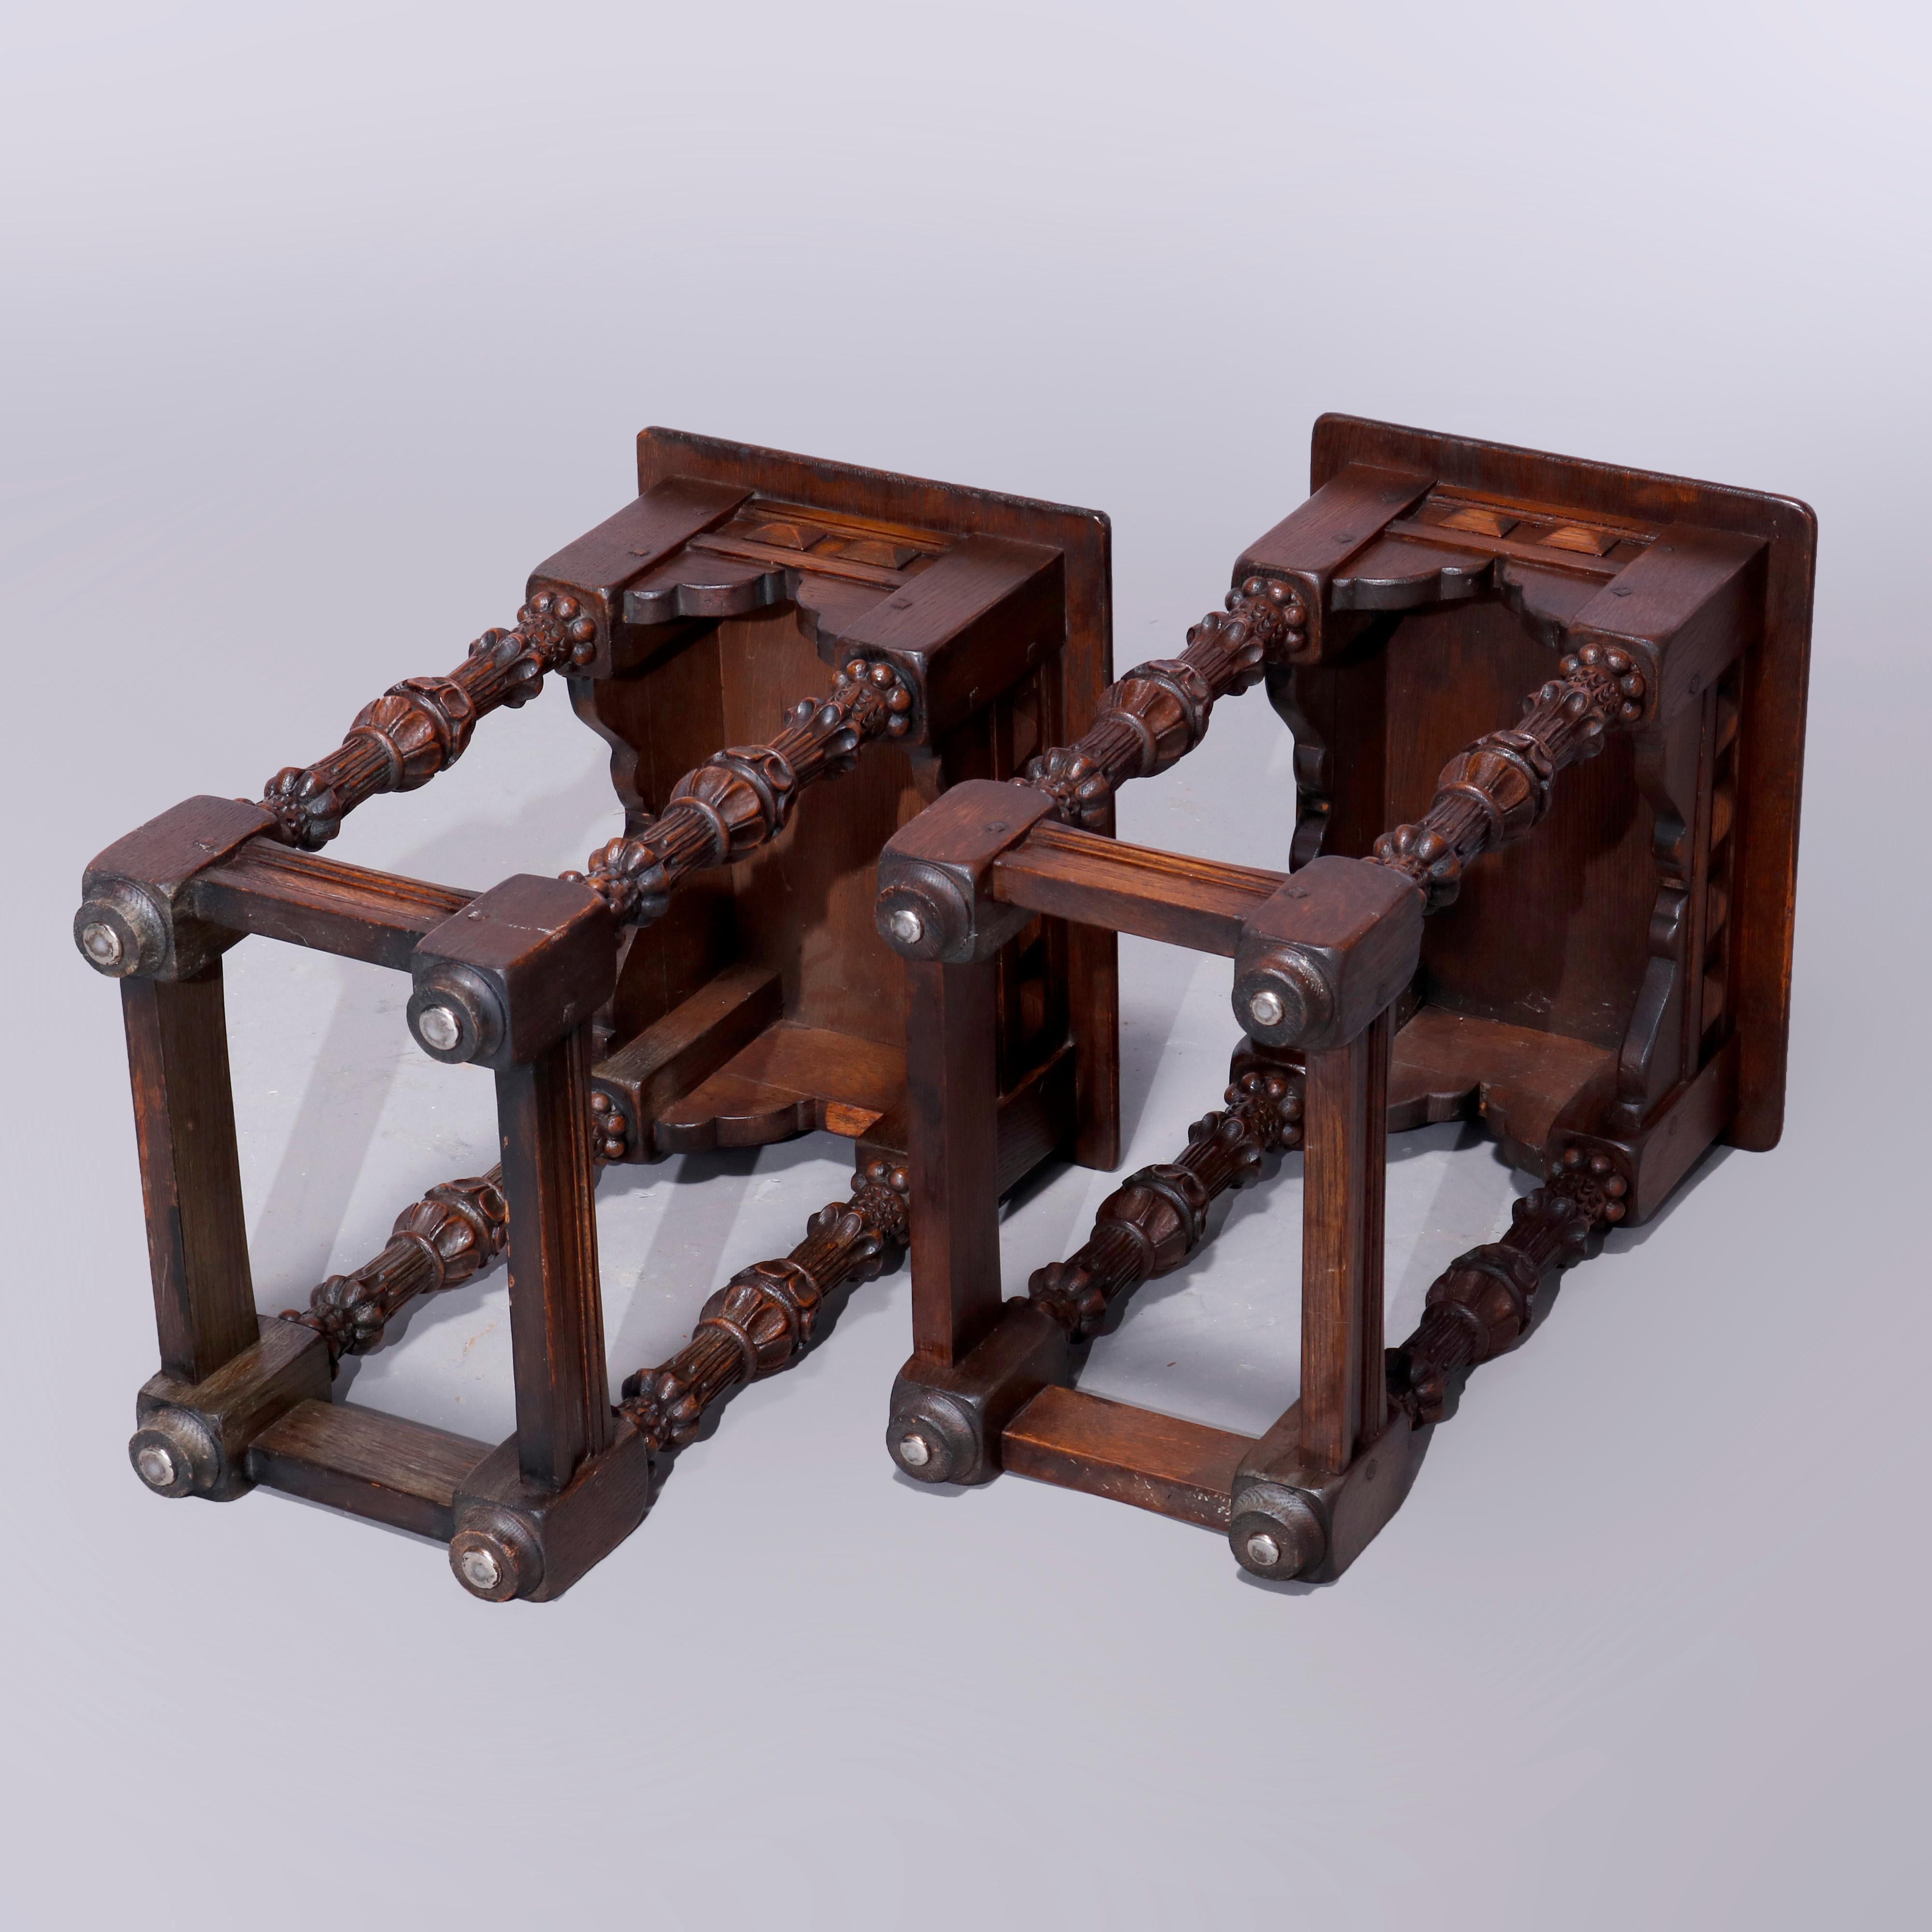 An antique pair of English Jacobean style side tables in the manner Kittinger offer oak construction with beveled tops over shaped skirts having pyramidal elements and raised on balustrade legs, c1920

Measures: 23.25